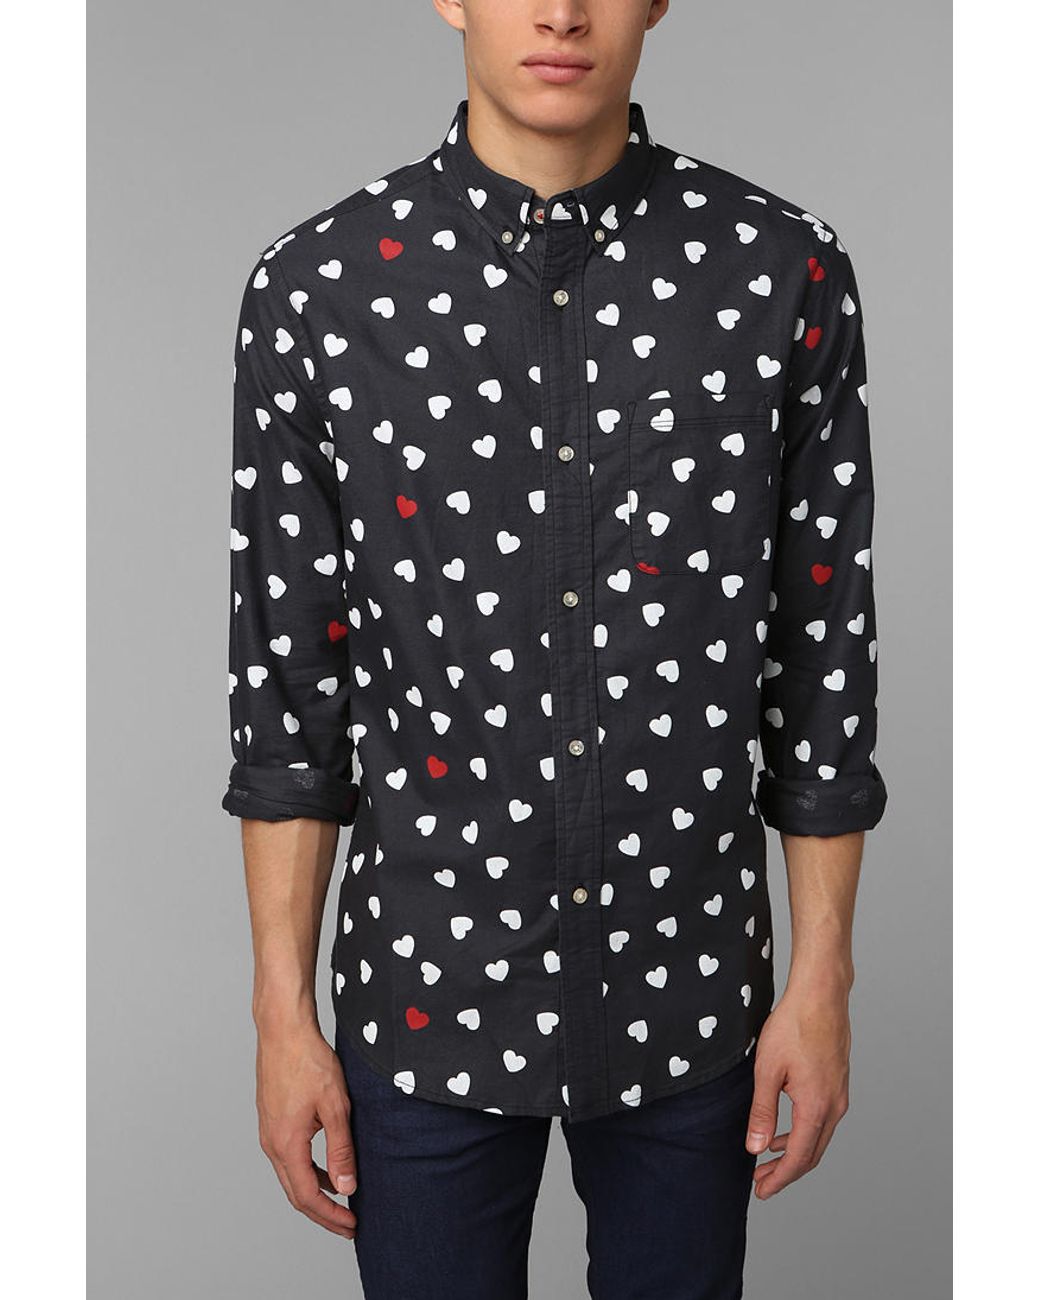 Urban Outfitters Hawkings Mcgill Hearts Oxford Button down Shirt in ...